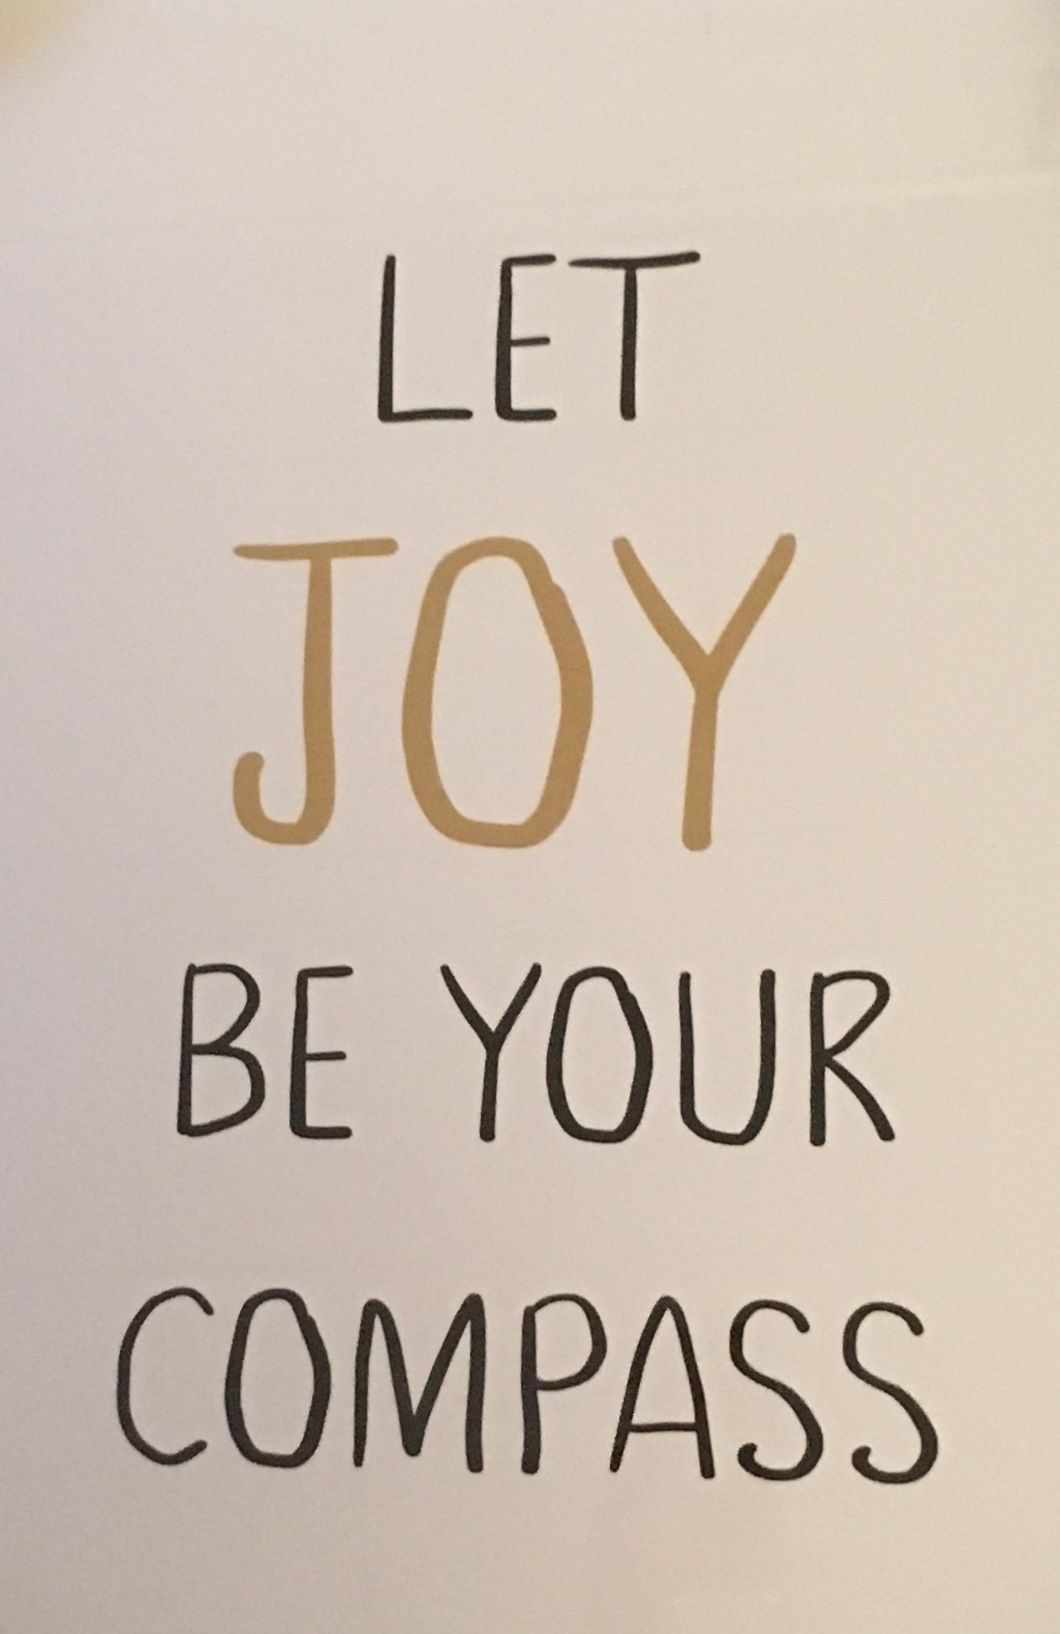 “Let Joy Be Your Compass:” Advice By My Wall Décor